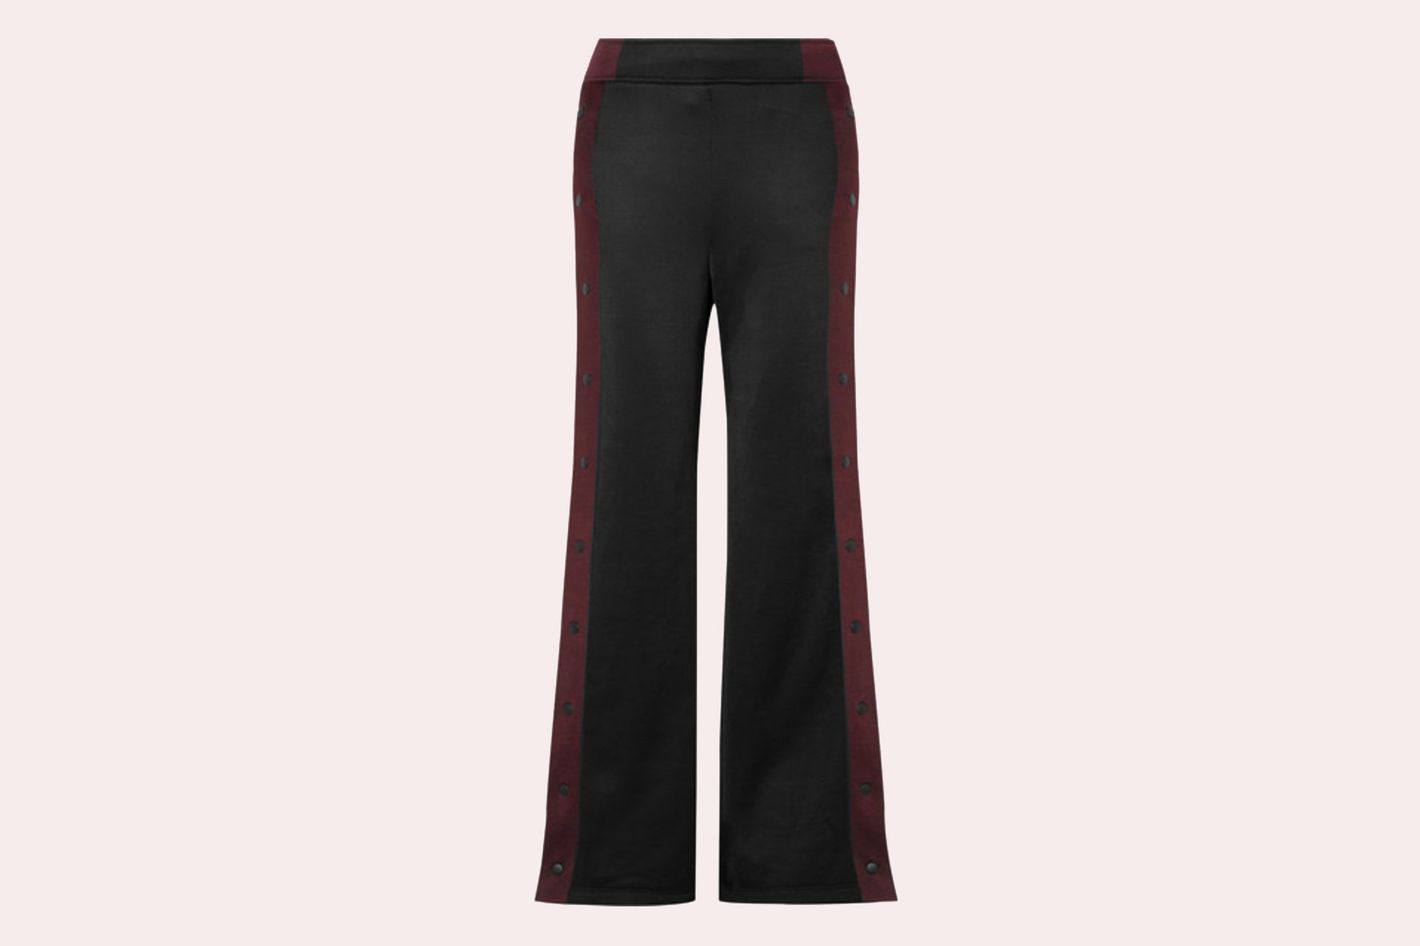 Stylish Stretchy Pants to Get You Through Thanksgiving